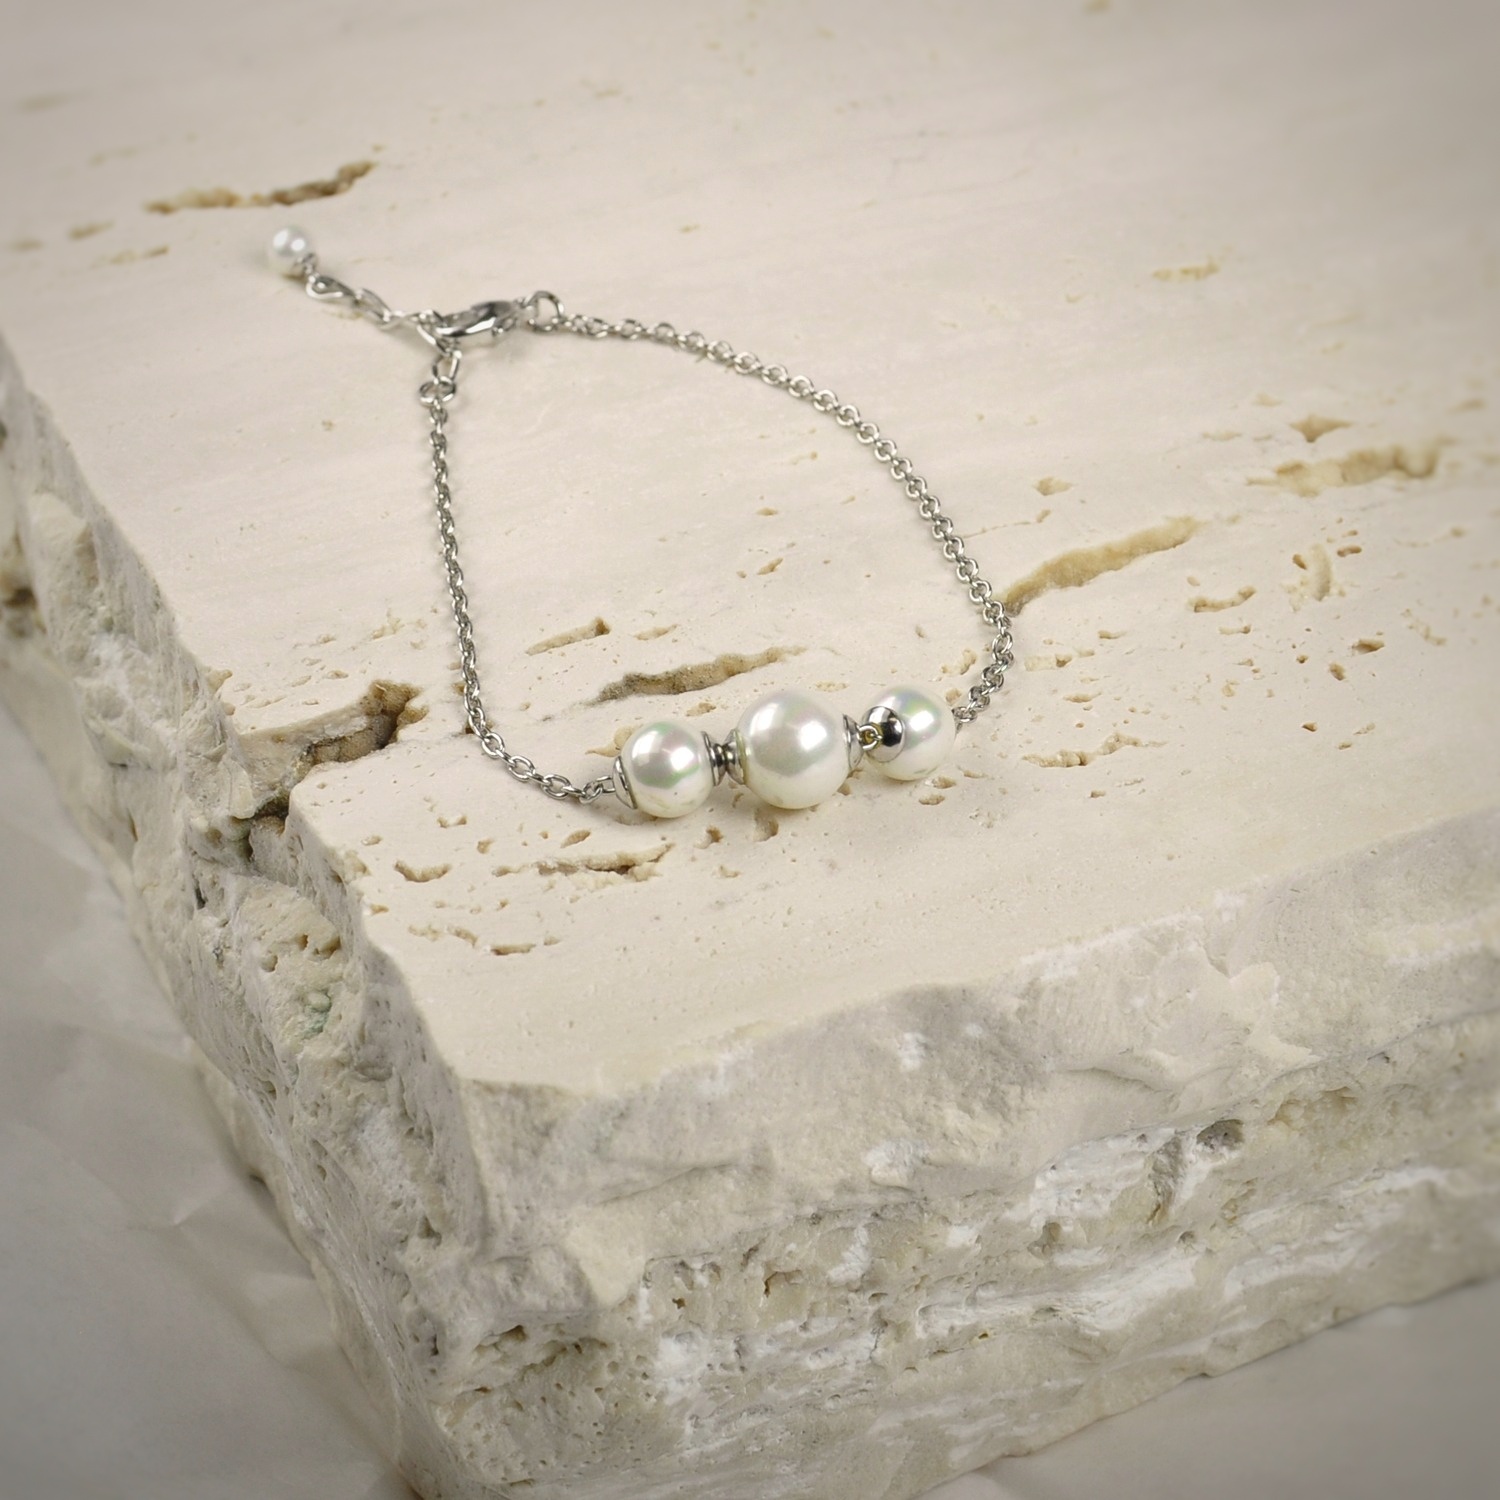 Silver bracelet with white pearls 1